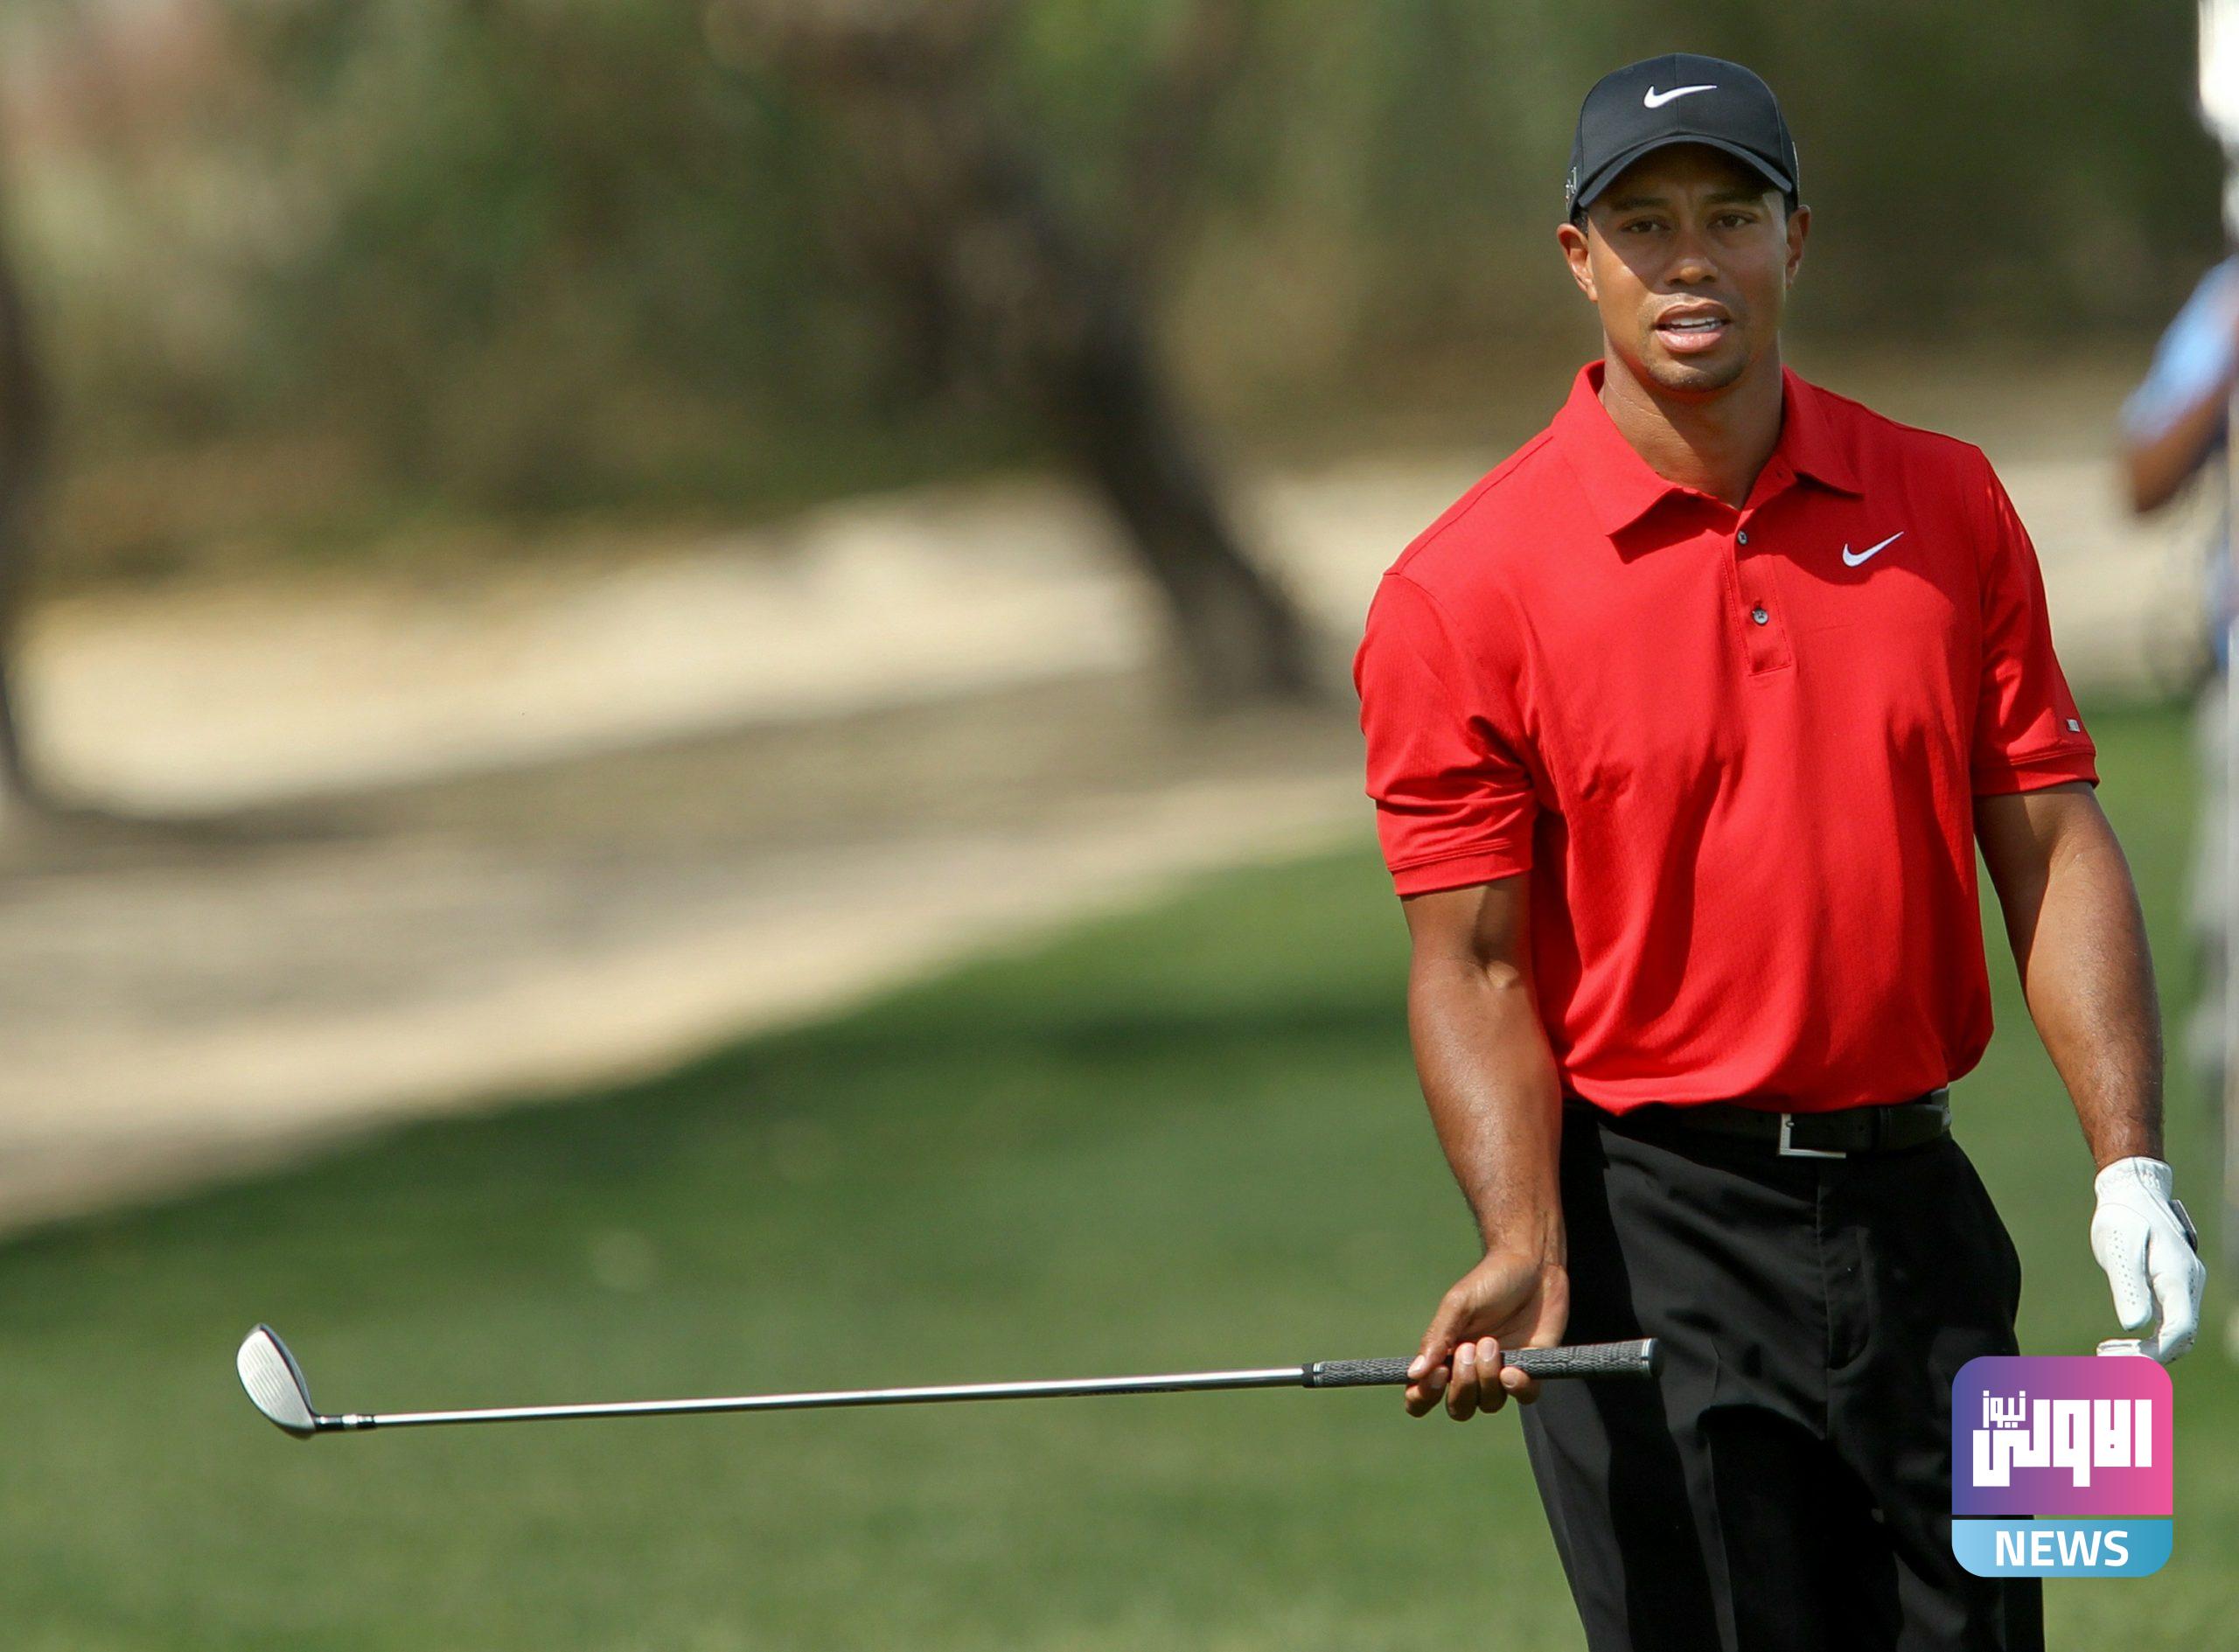 Tiger Woods 2013 HD Wallpaper Photos Free scaled